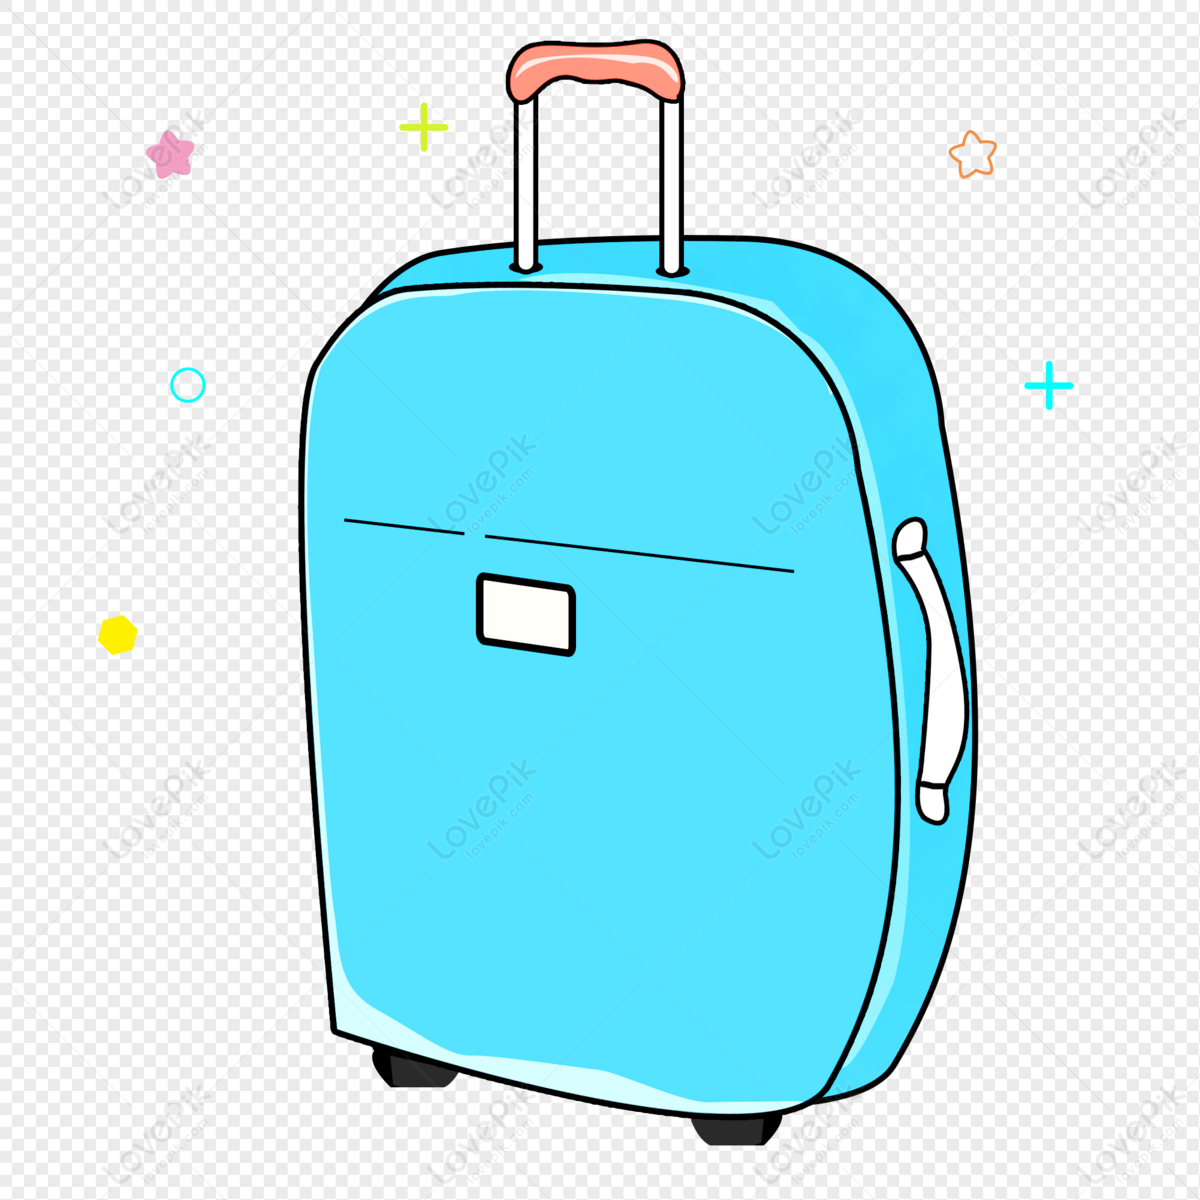 Cartoon Suitcase PNG Image And Clipart Image For Free Download - Lovepik |  401113698